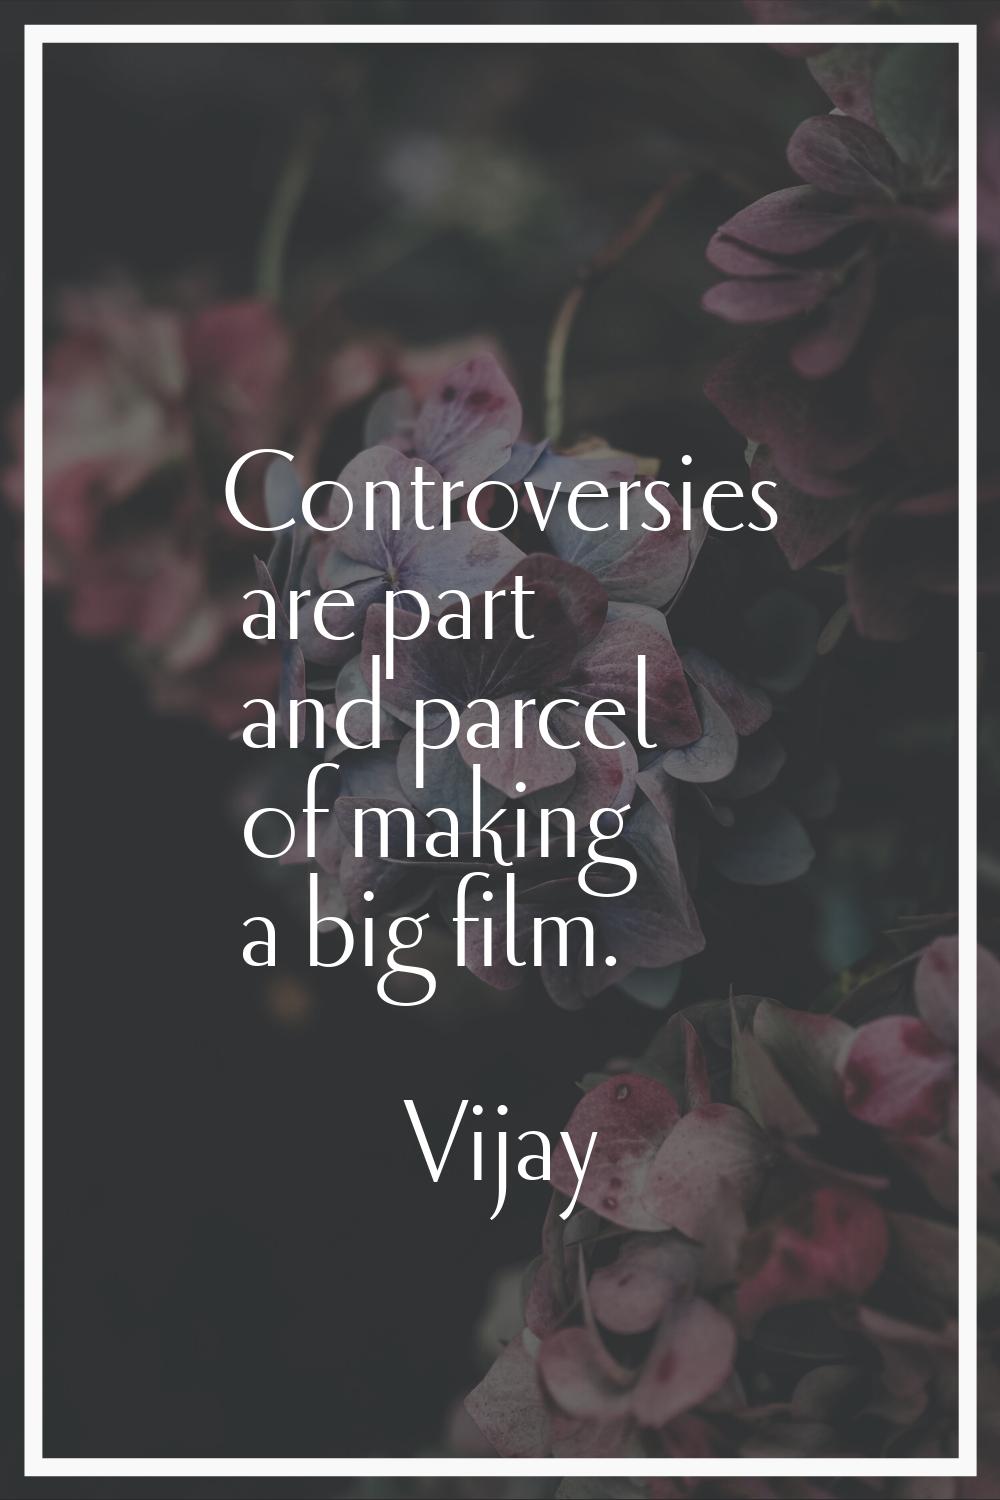 Controversies are part and parcel of making a big film.